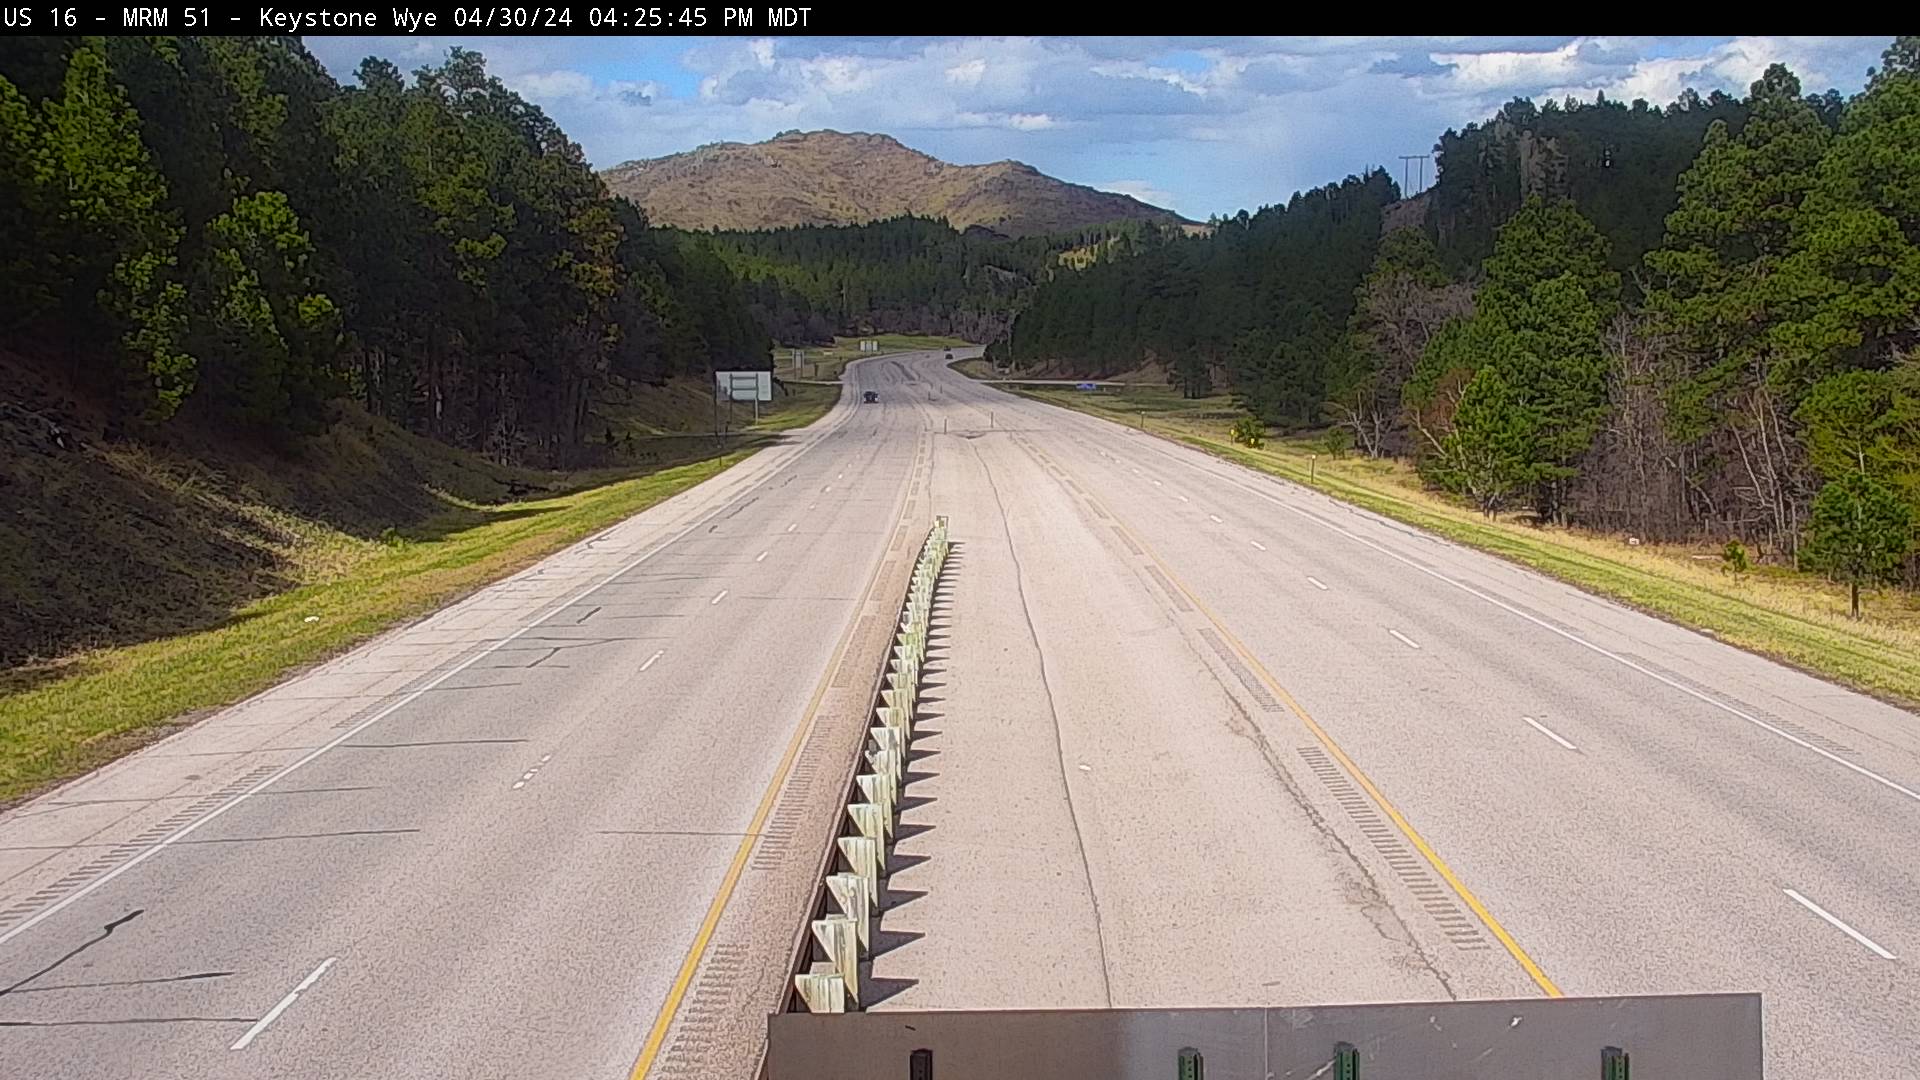 Traffic Cam North of town along US-16 @ MP 51 - East Player